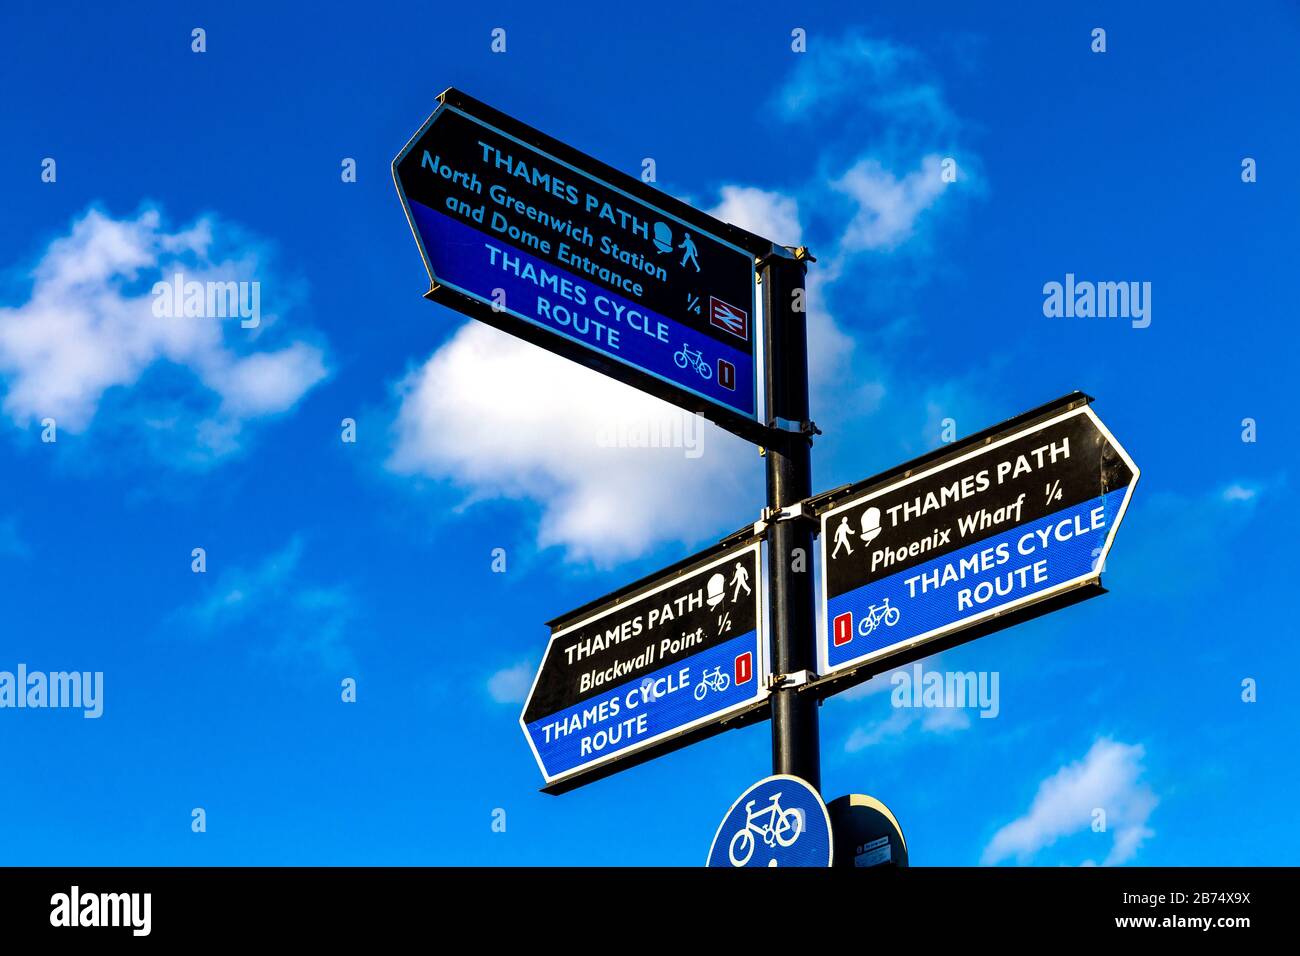 Thames Path direction sign, London, UK Stock Photo